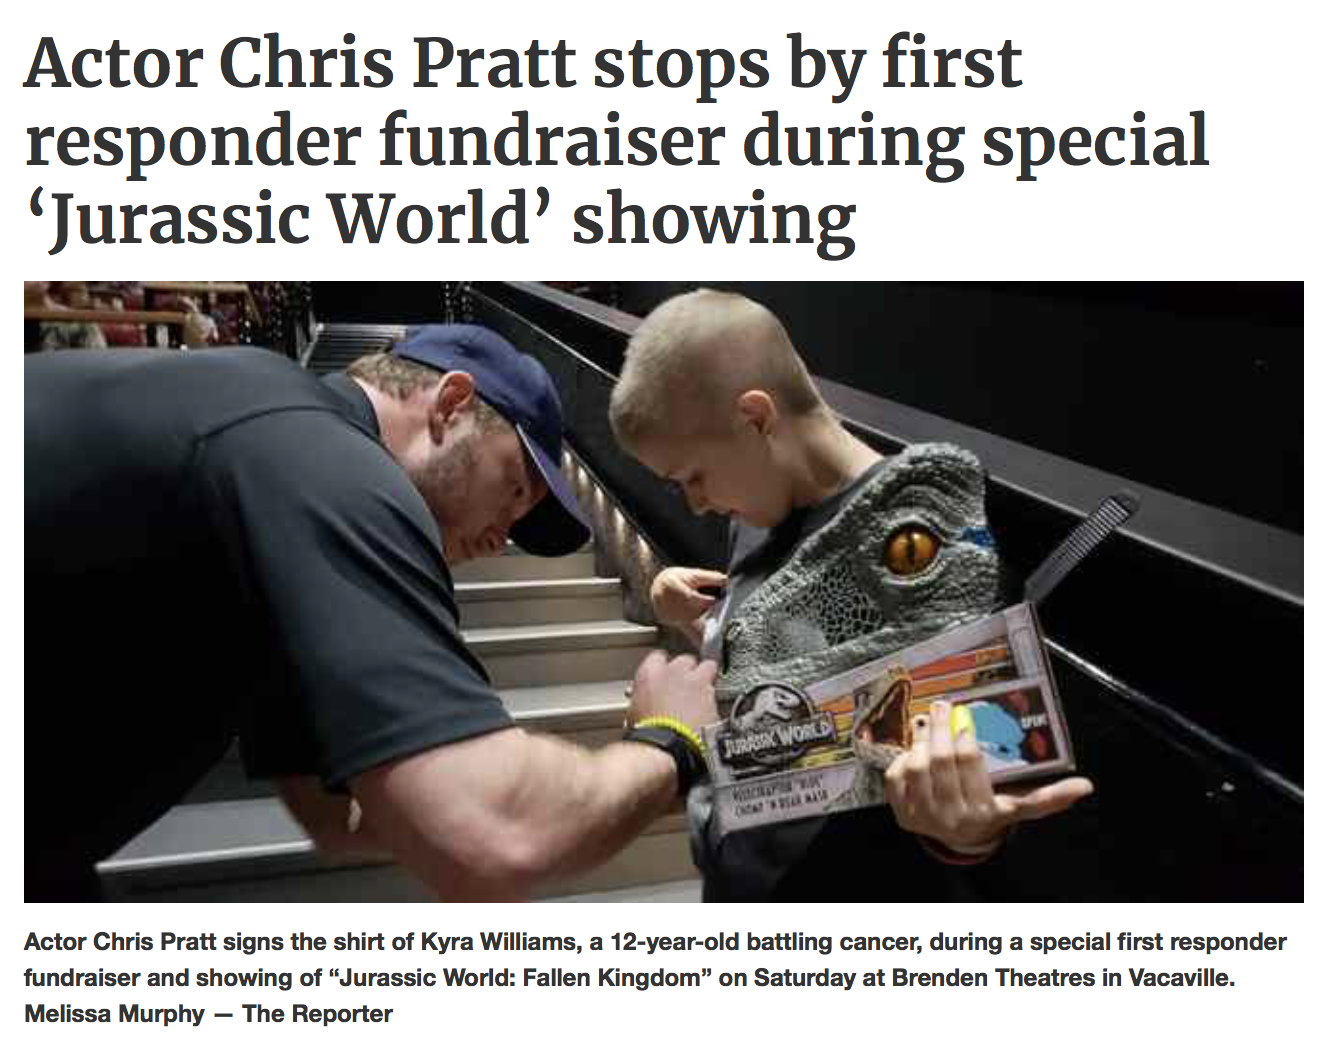 autonomous university of barcelona - Actor Chris Pratt stops by first responder fundraiser during special 'Jurassic World' showing Actor Chris Pratt signs the shirt of Kyra Williams, a 12yearold battling cancer, during a special first responder fundraiser